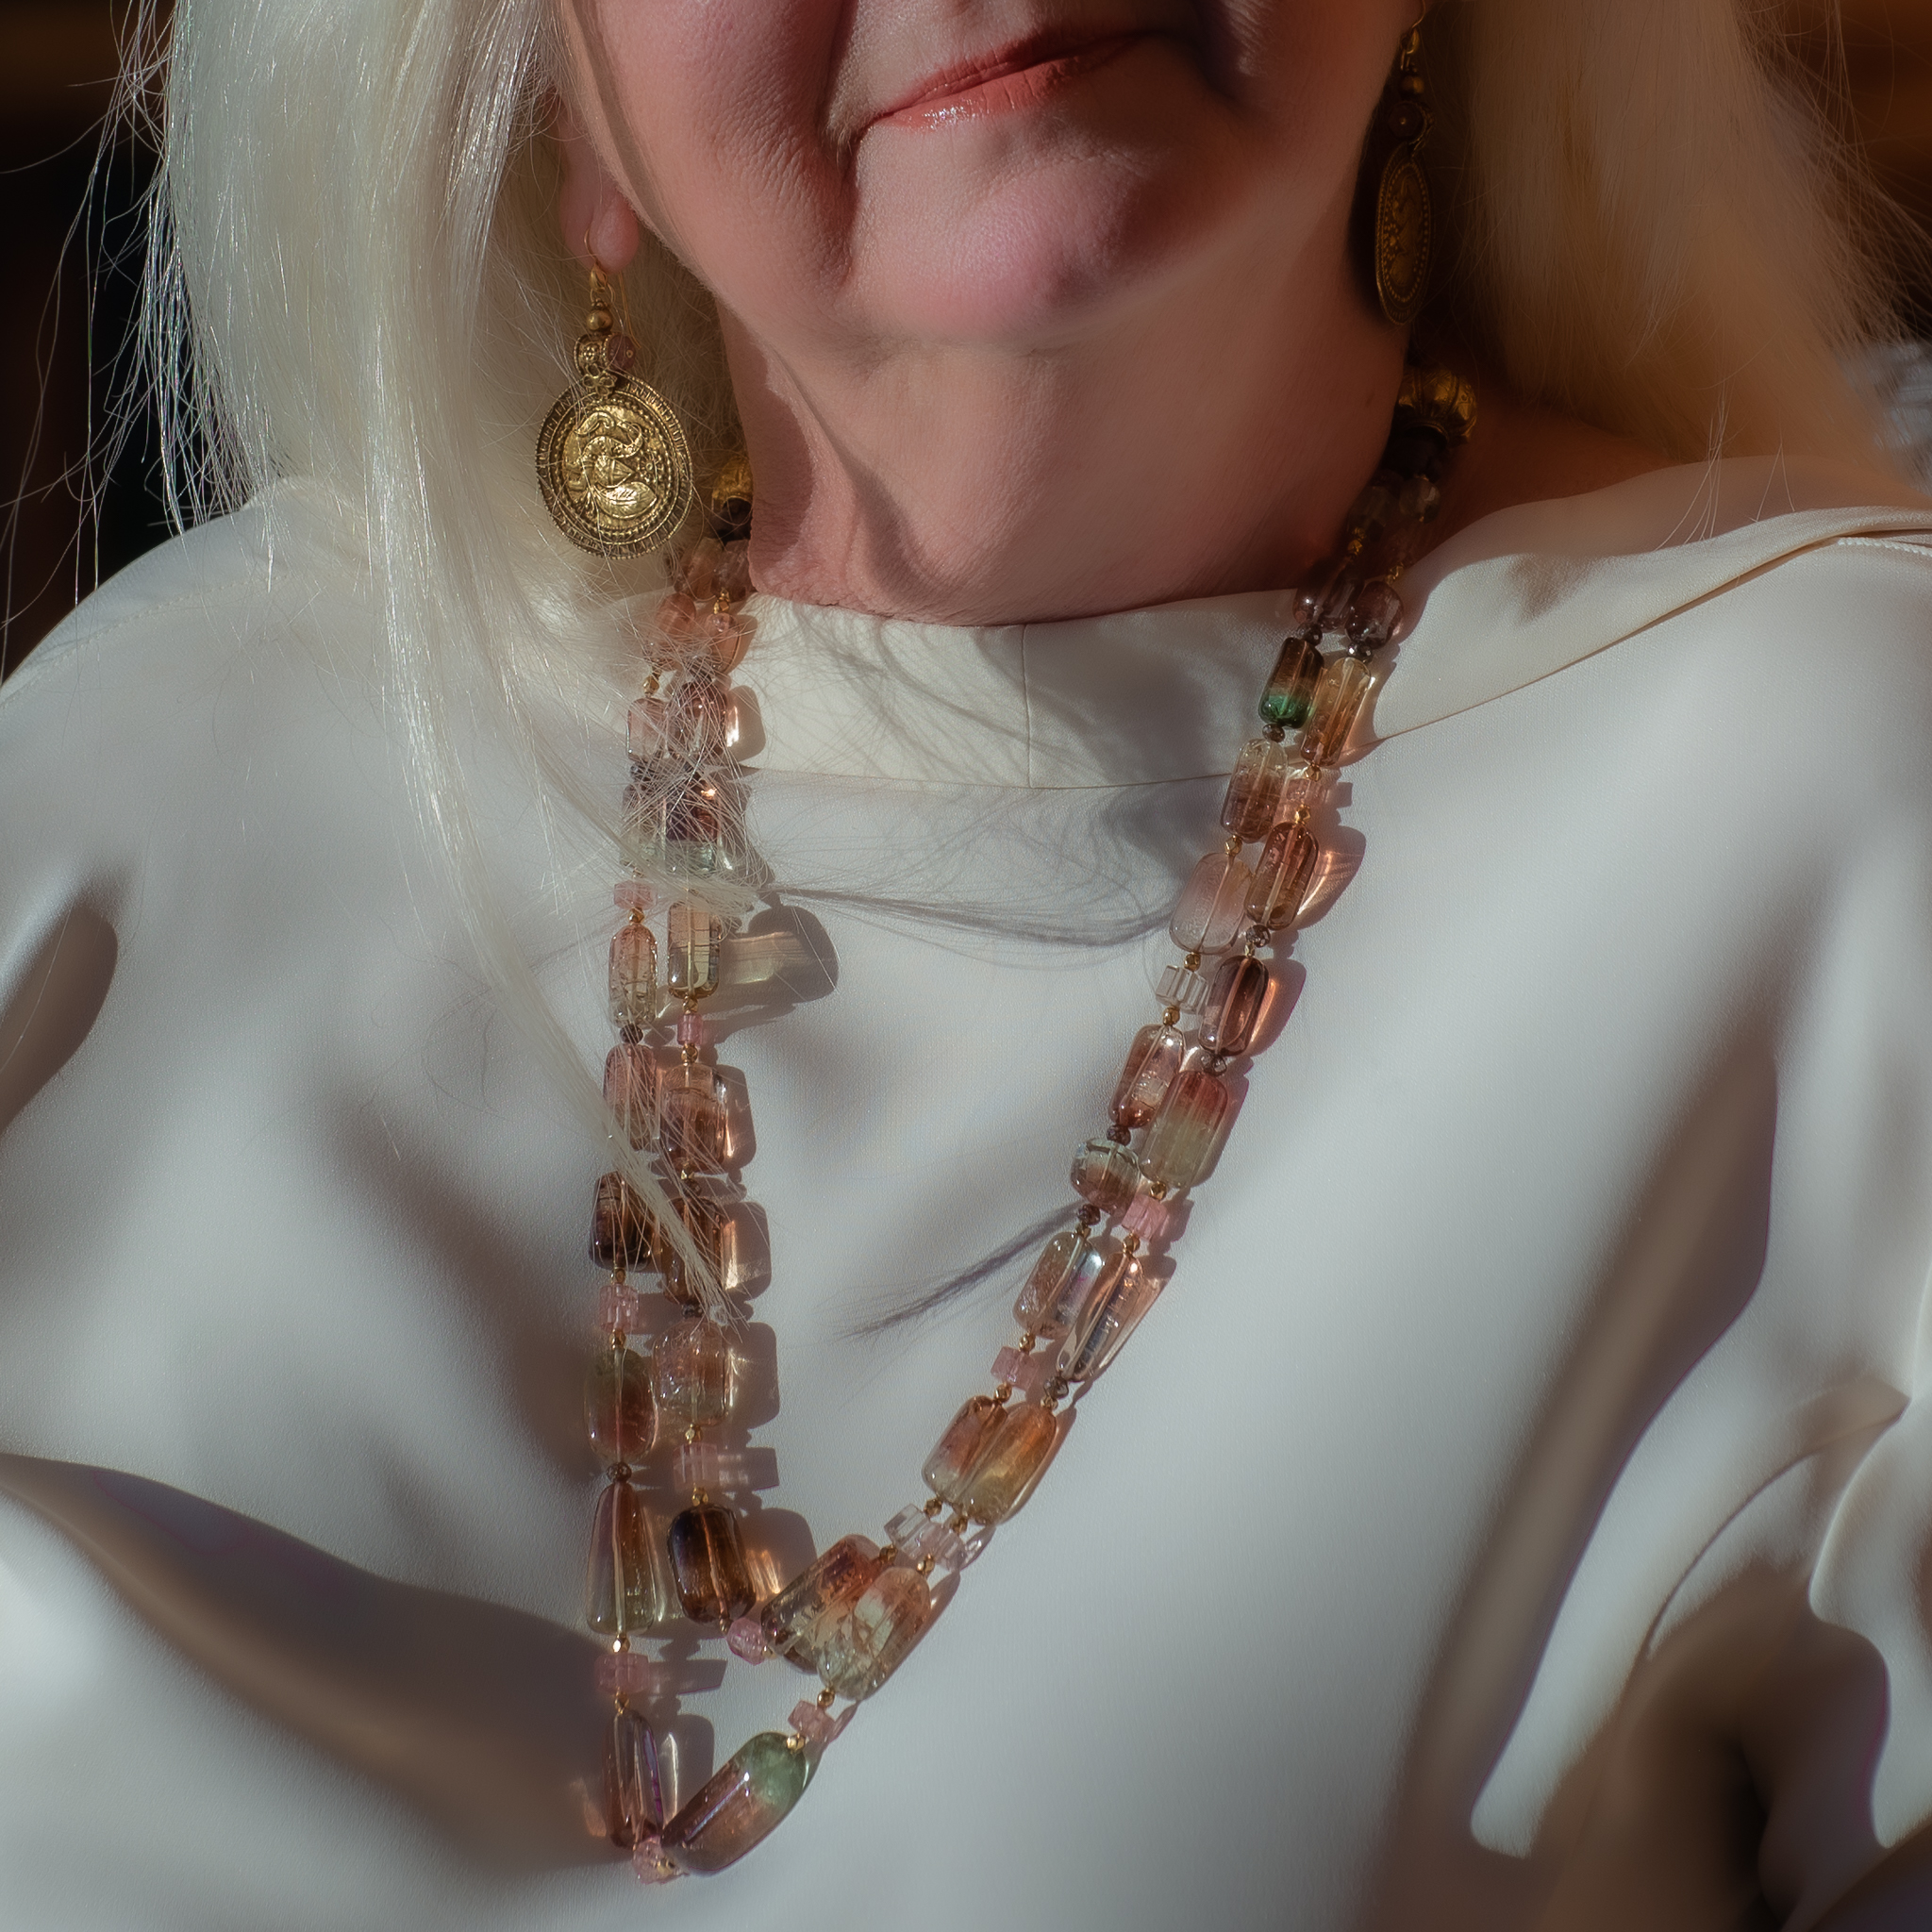 Photograph of the designer wearing gold medallion earrings with peacock motif and pink and green tourmaline crystal necklace